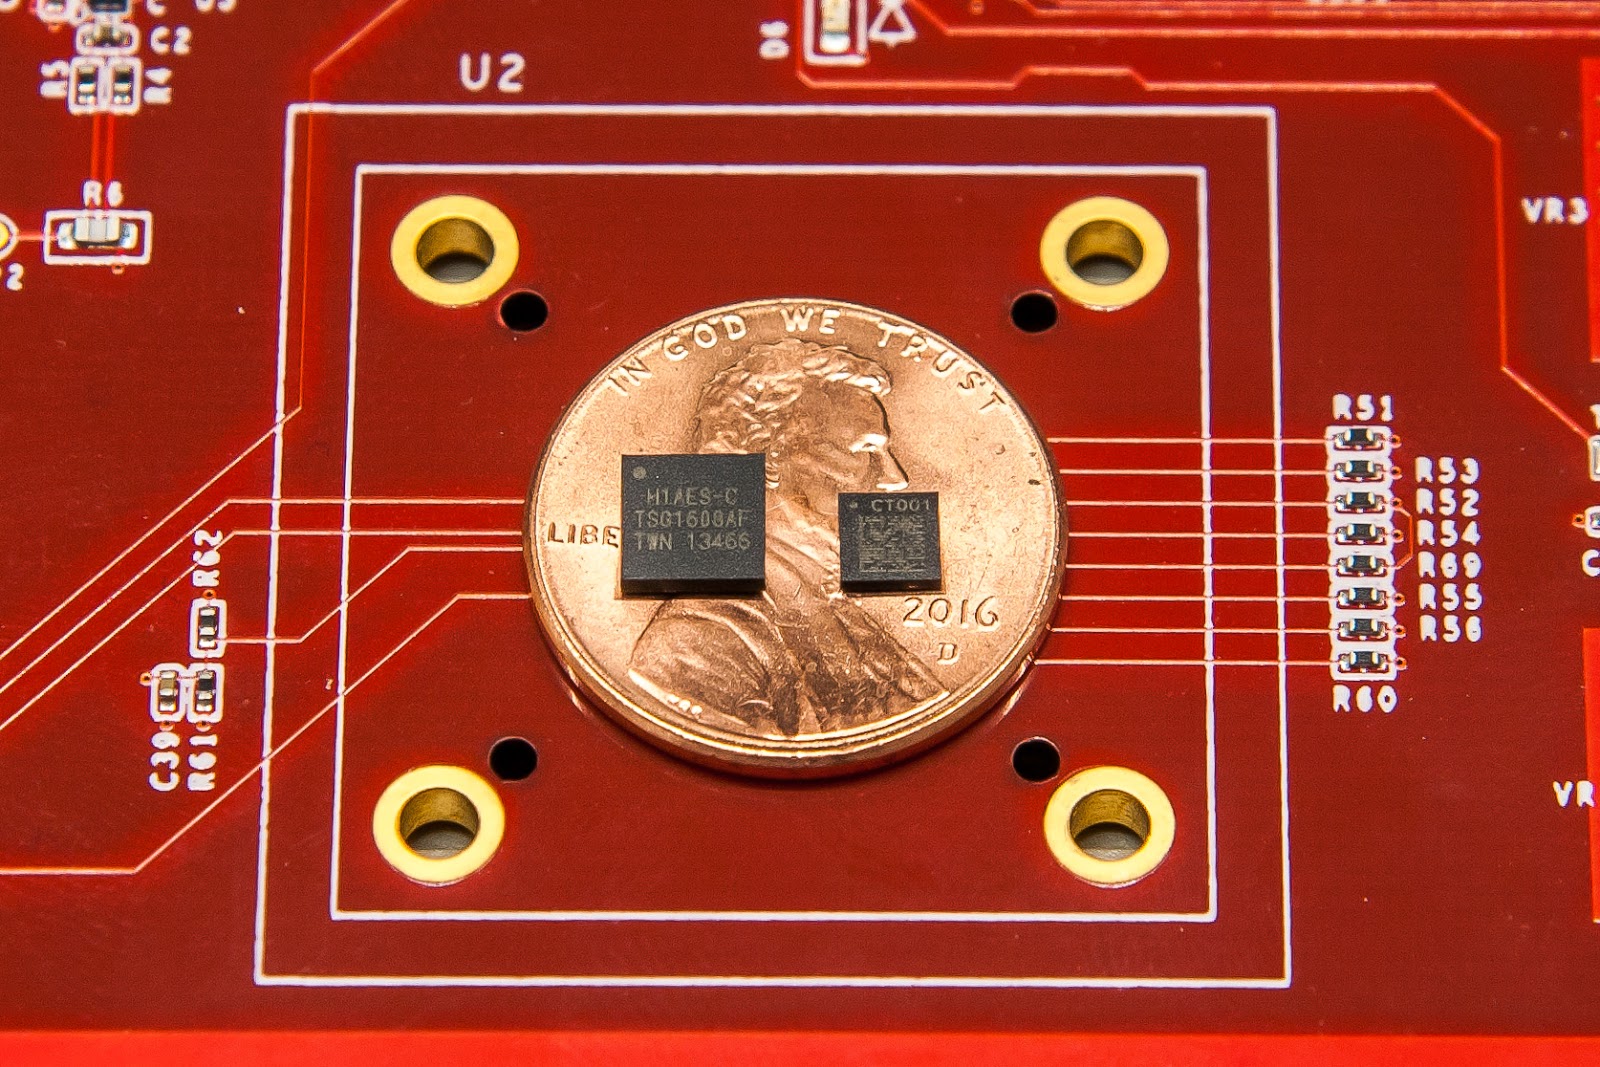 Picture showing Google's Titan and Titan M security chip